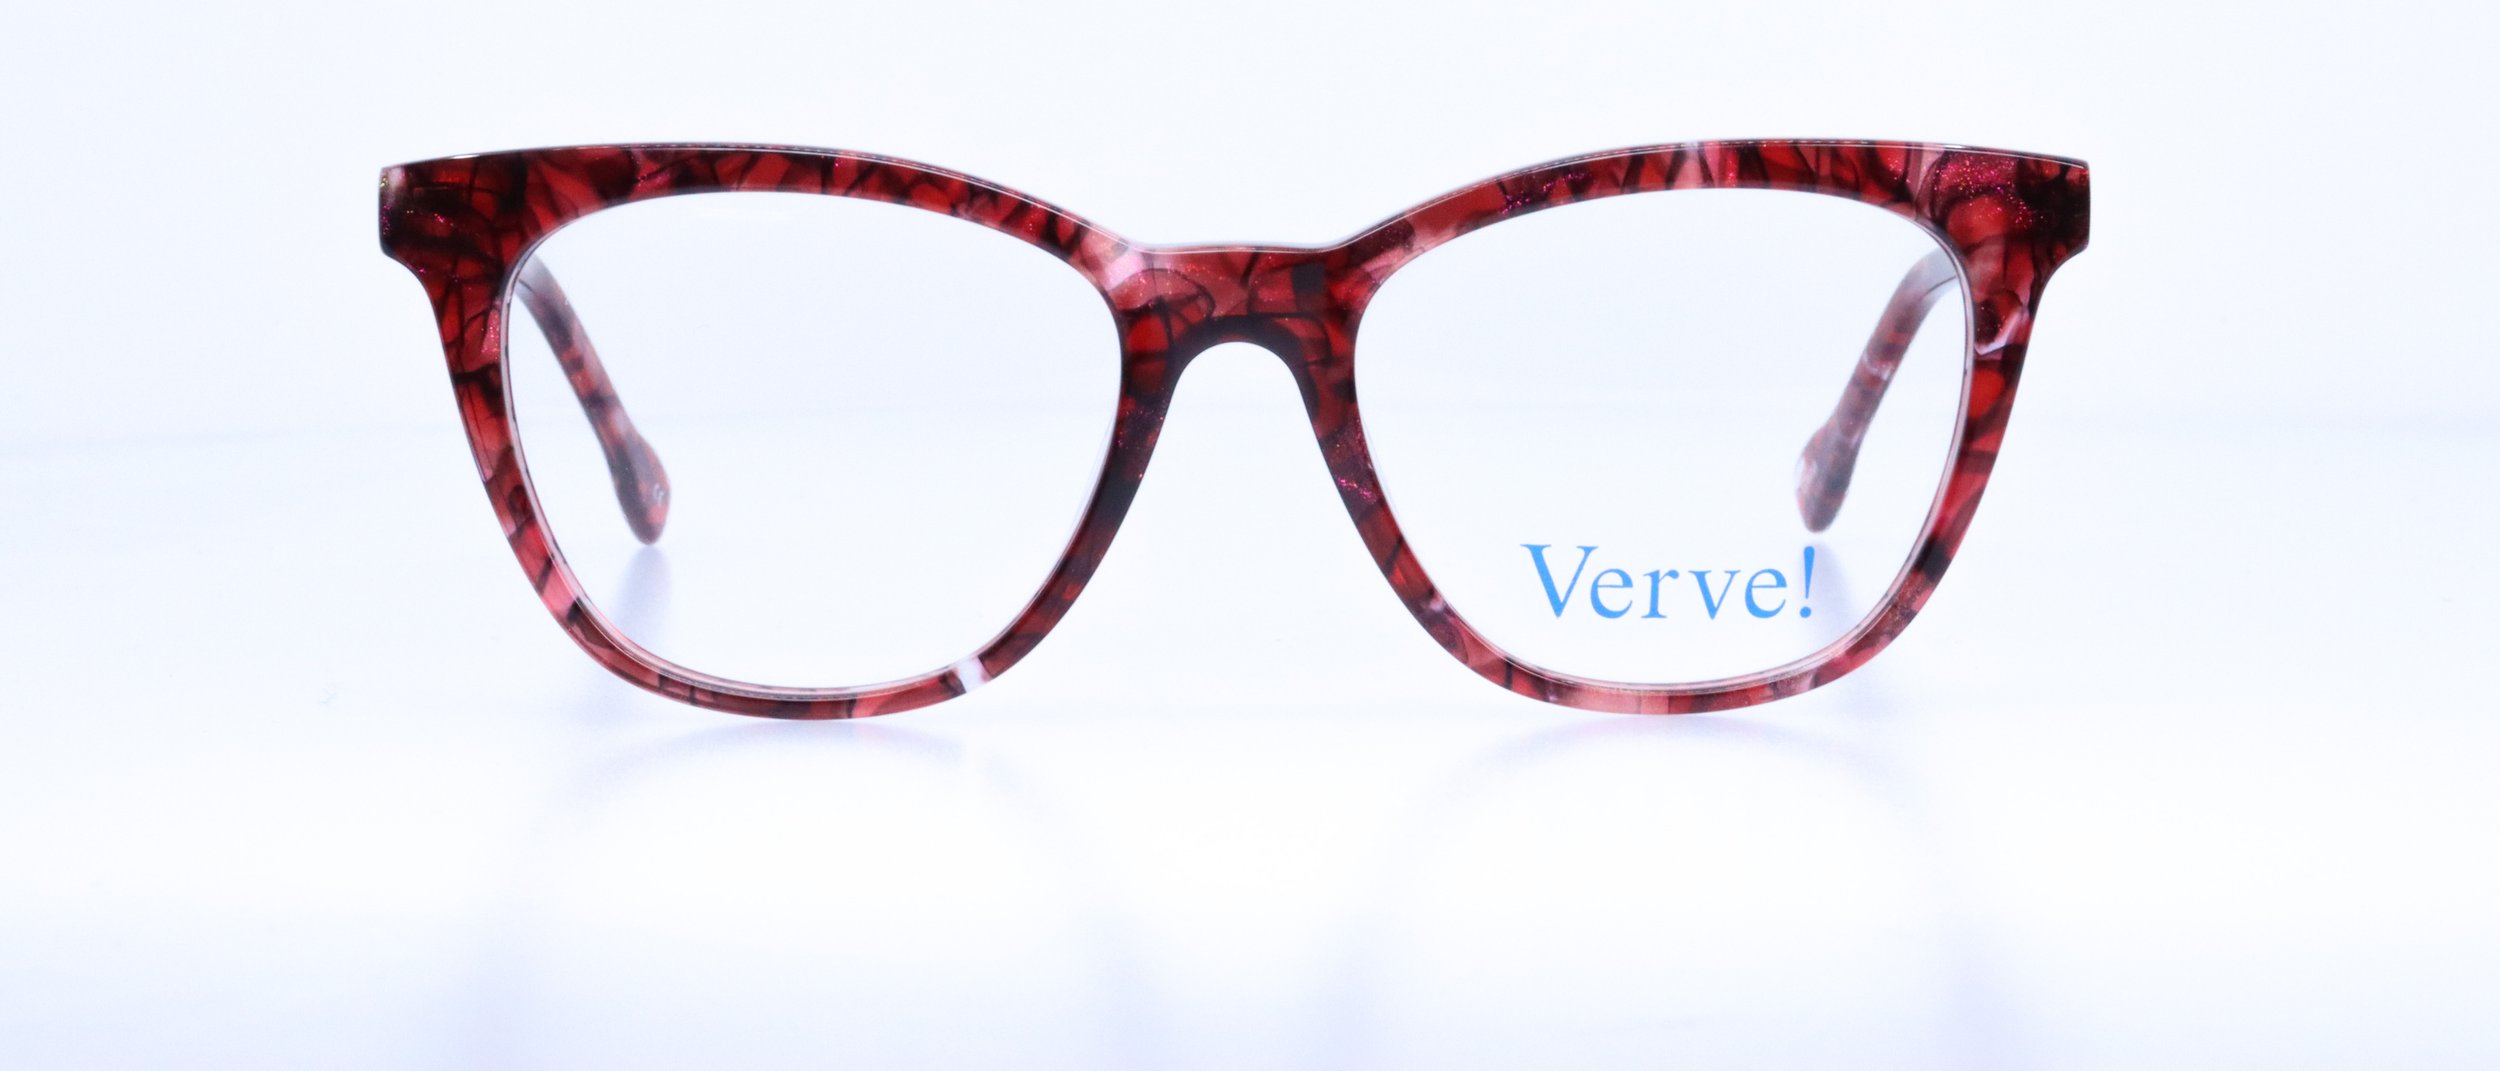  NEW!! Orenda: 50-18-140, Available in Blue/Demi or Red/Demi 